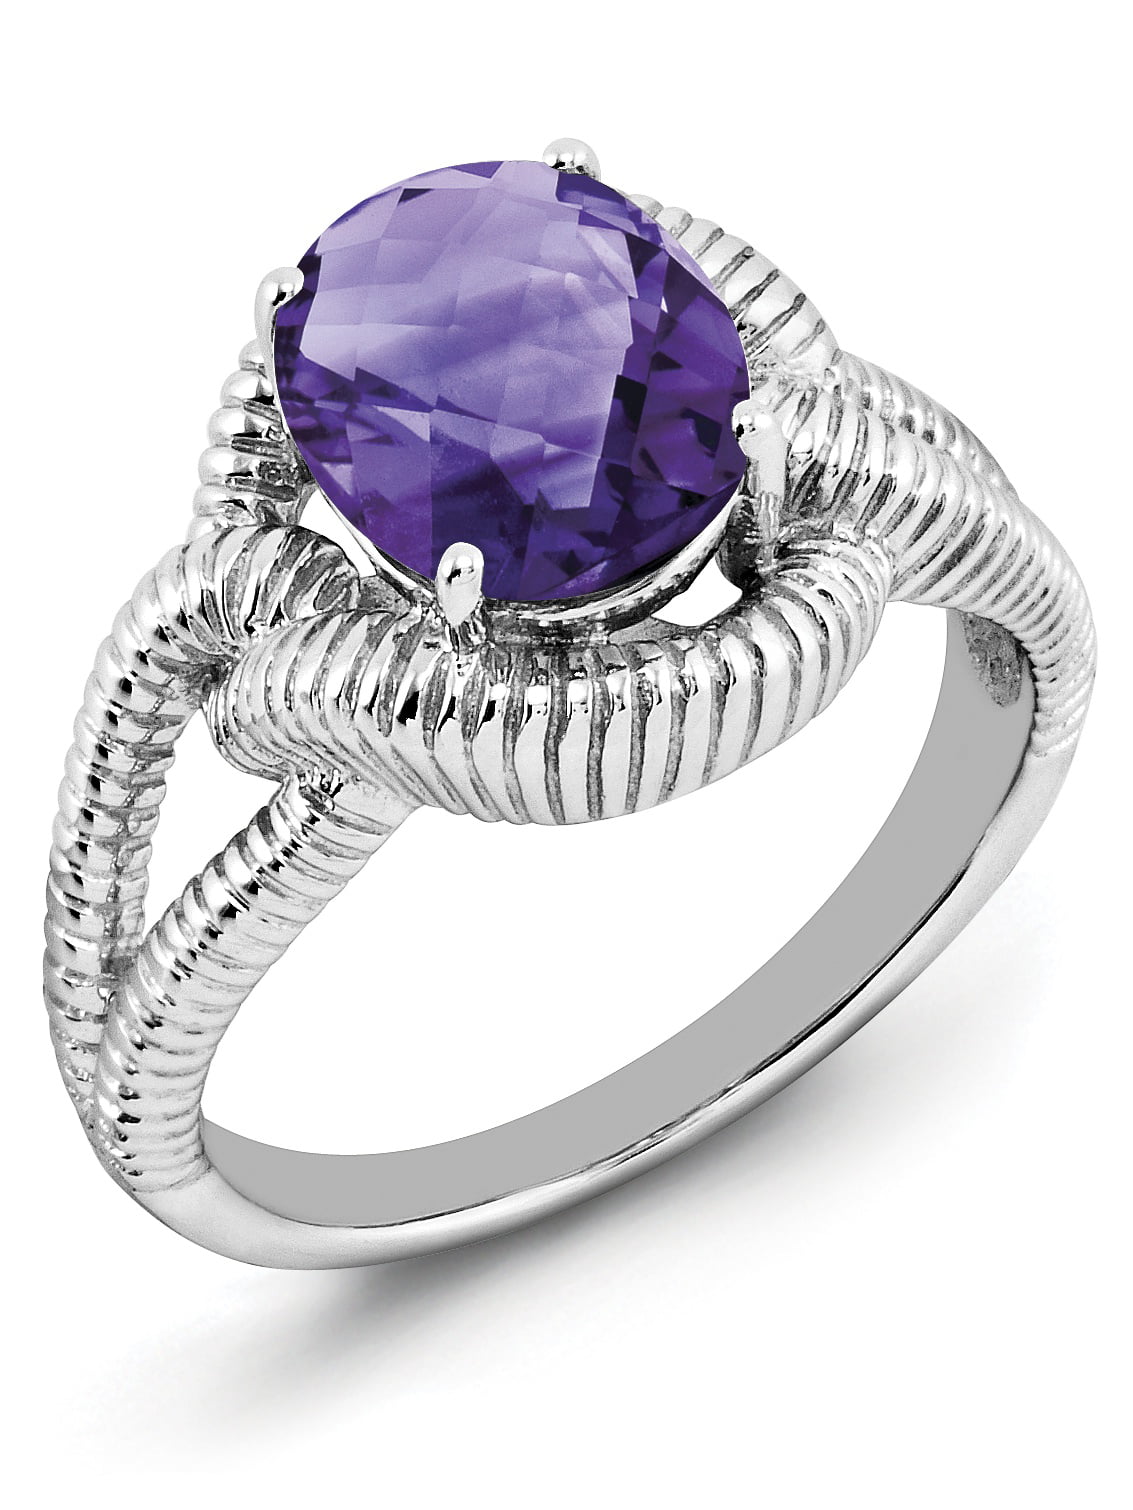 Details about   Amethyst 925 Refined Silver Genuine Women Luxury Ring 